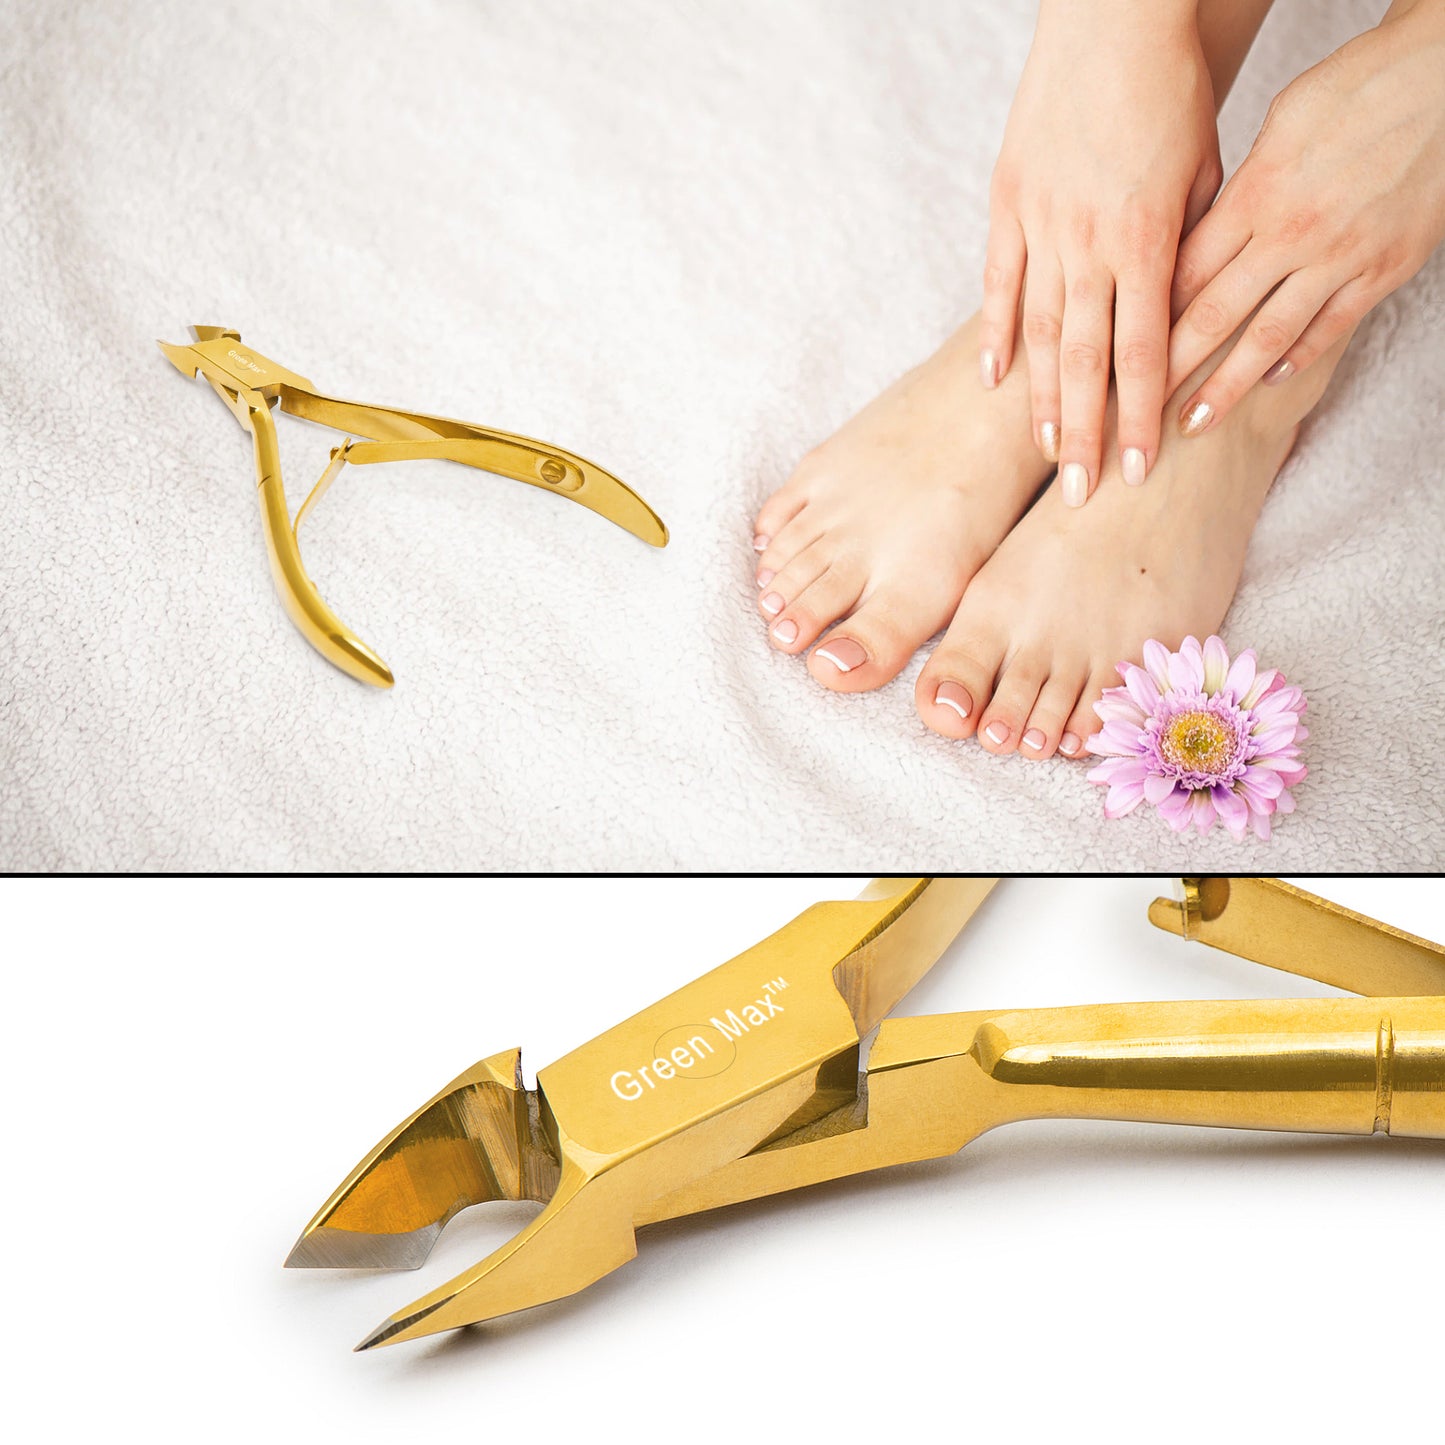 Nagelriemtang, spits mes, nagelriemtrimmer, manicure | Pedicure tool. (GOUD) 4"